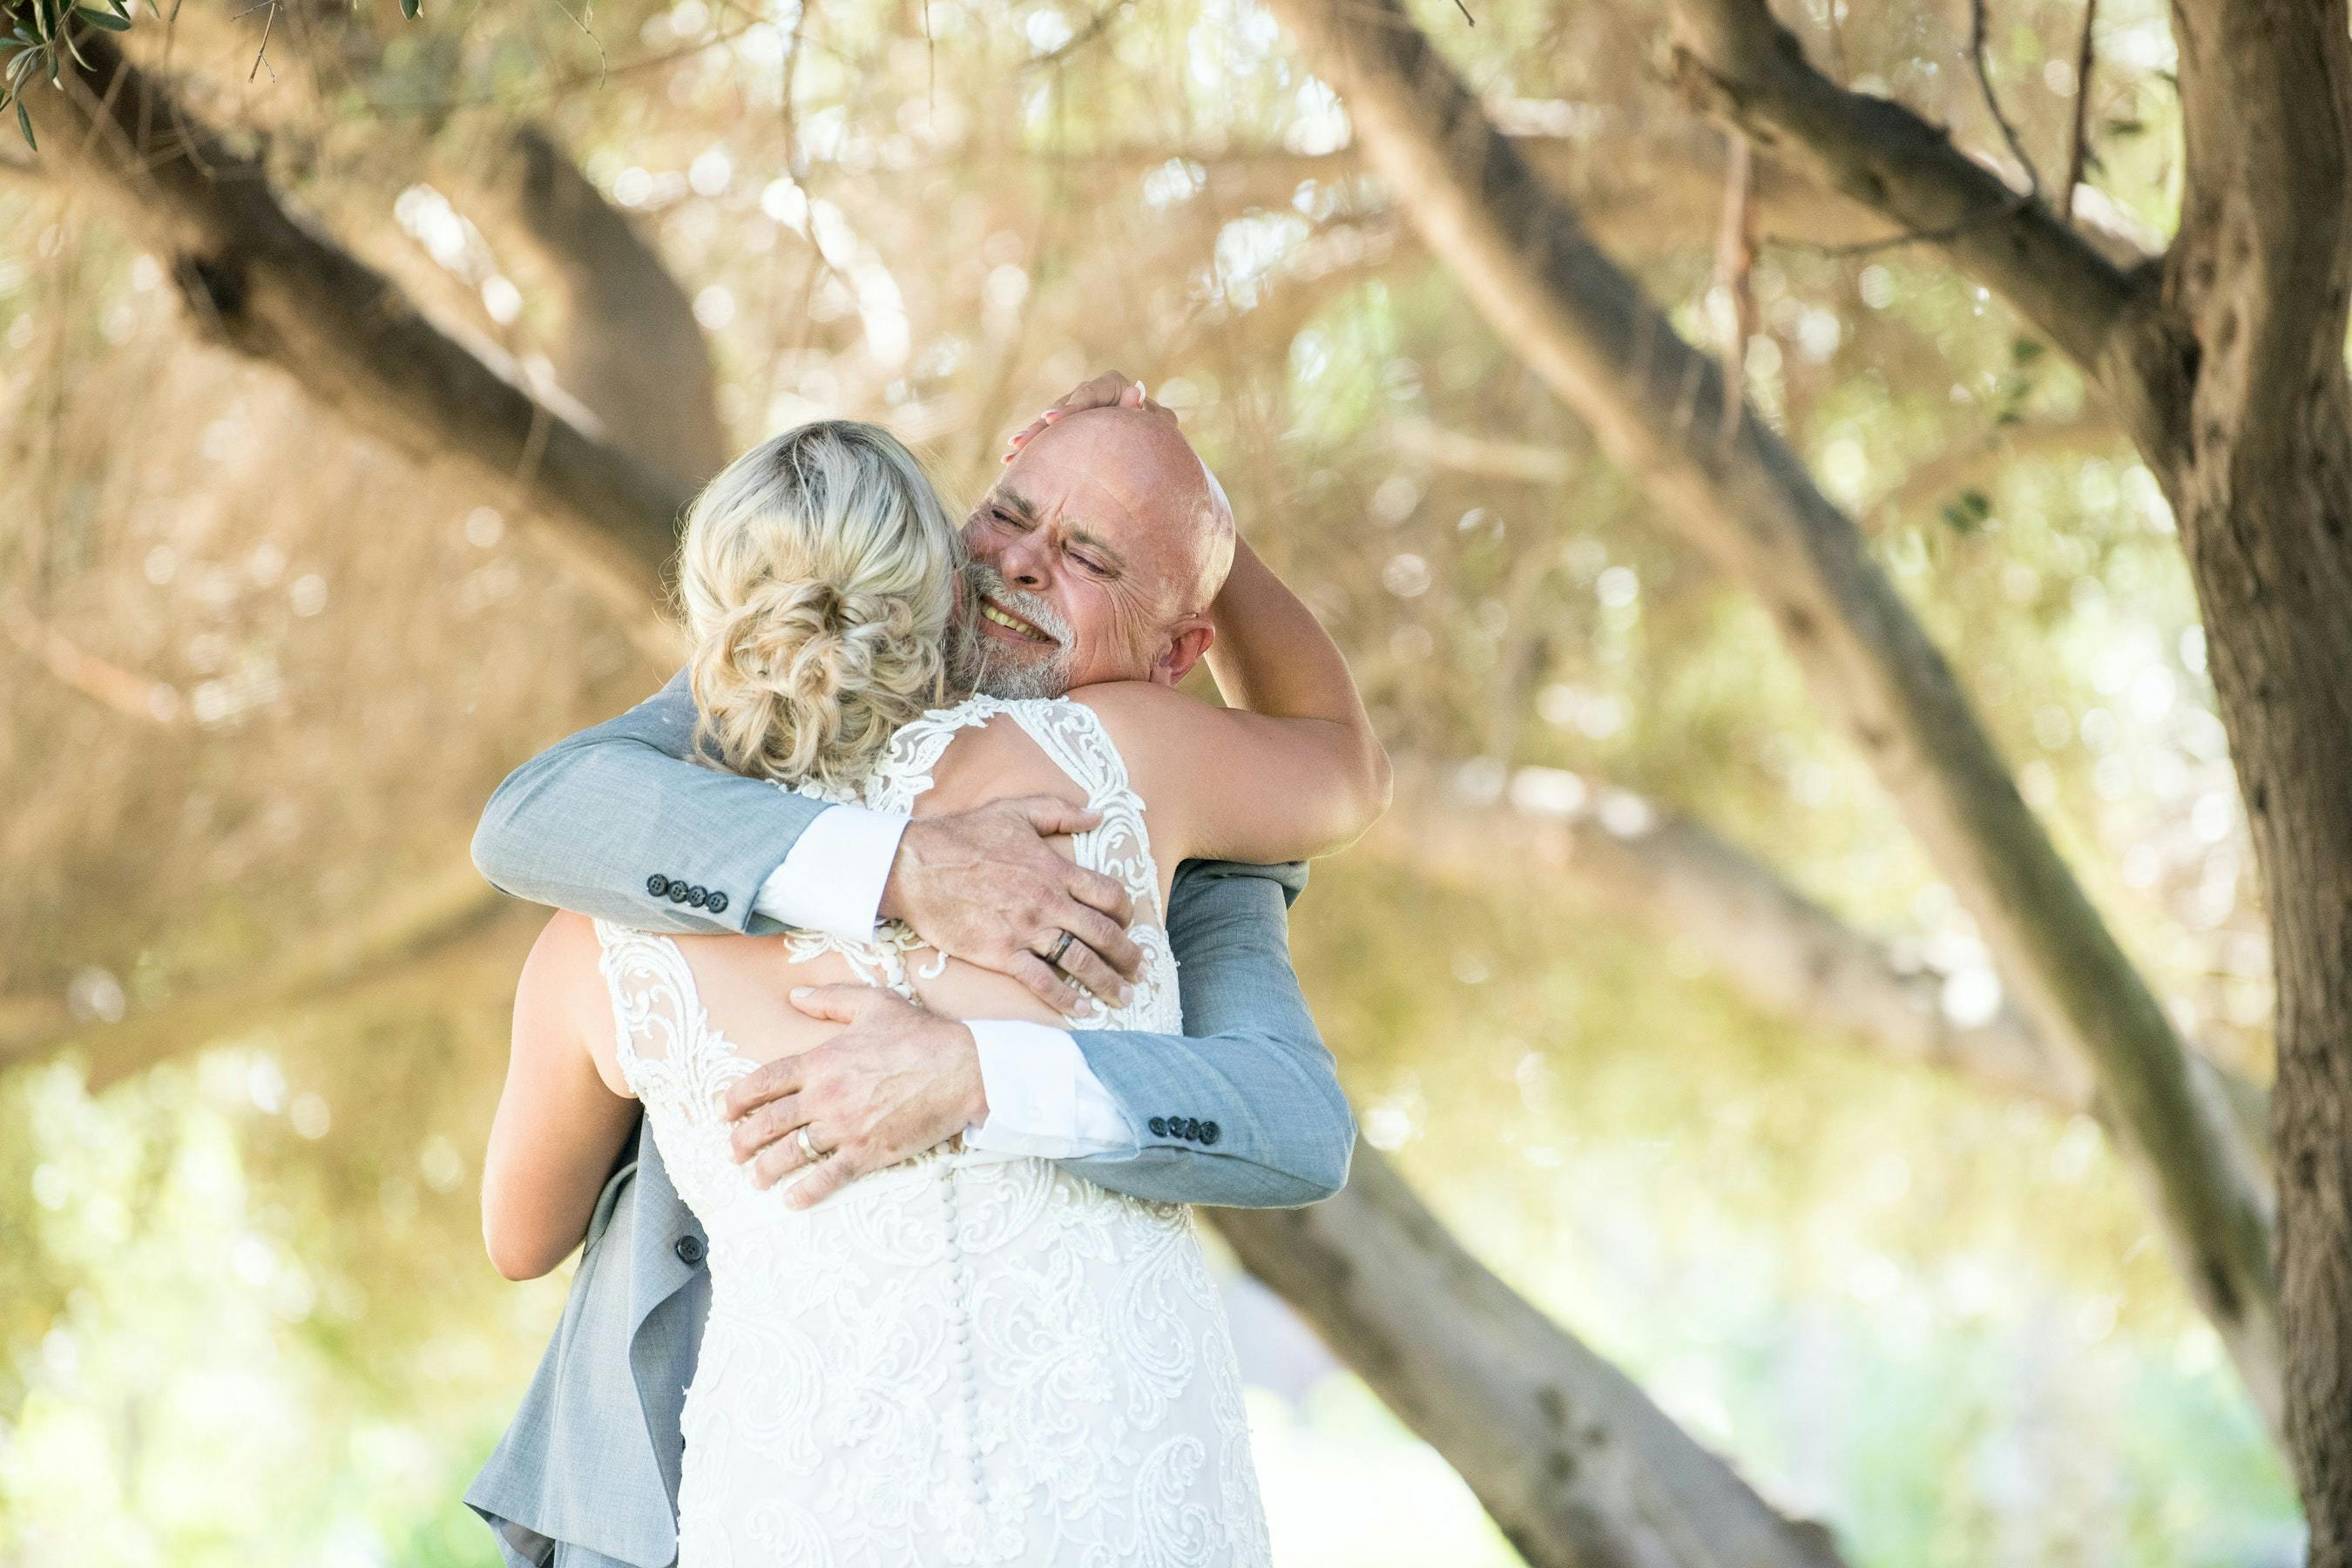 I Want To Show What True Love Looks Like By Photographing A Couple That Has  Been Married For 55 Years | Older couple photography, Older couple poses, Older  couple wedding